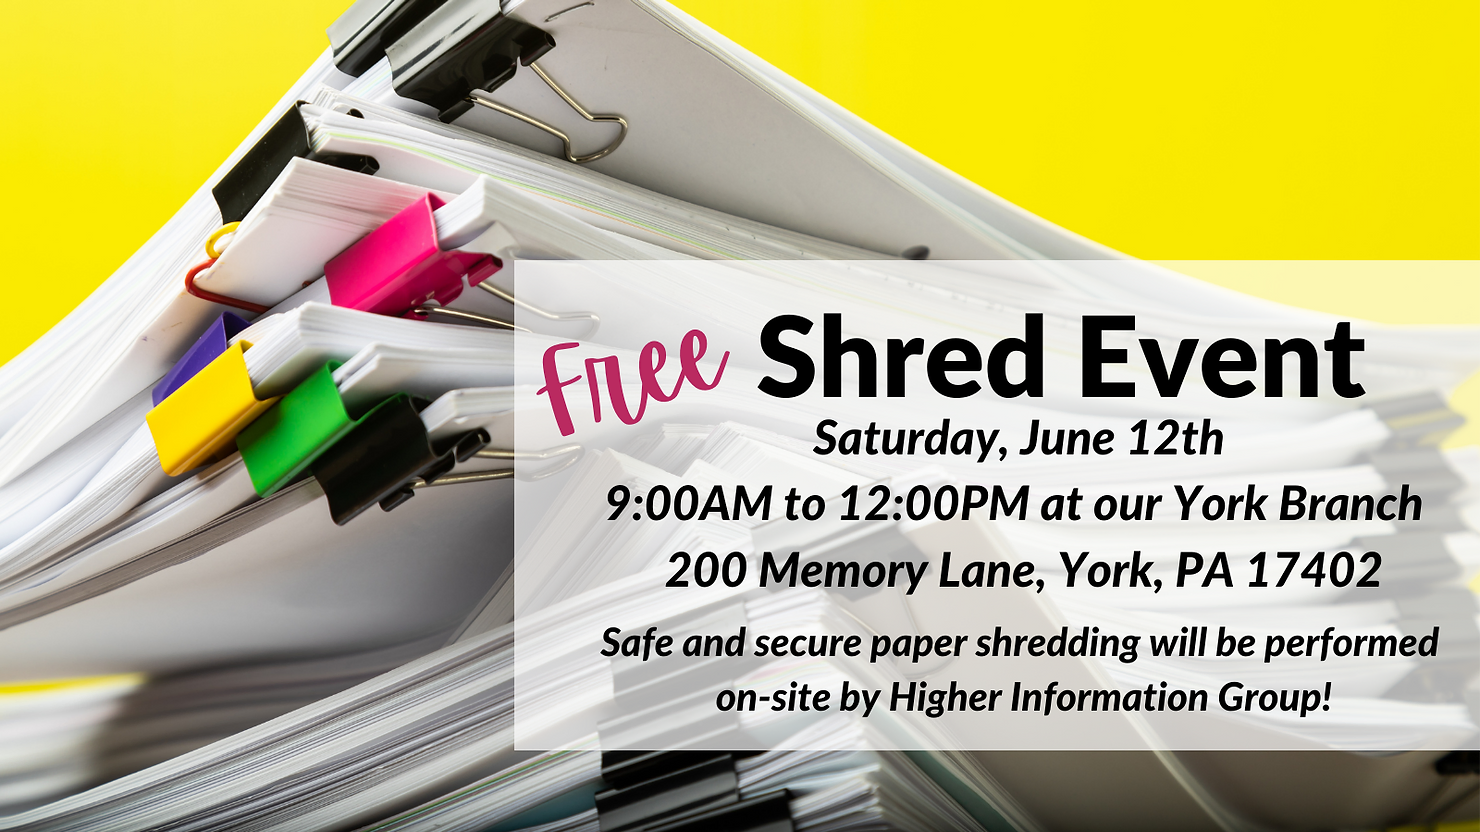 FREE Shred Event at our York Branch featured image